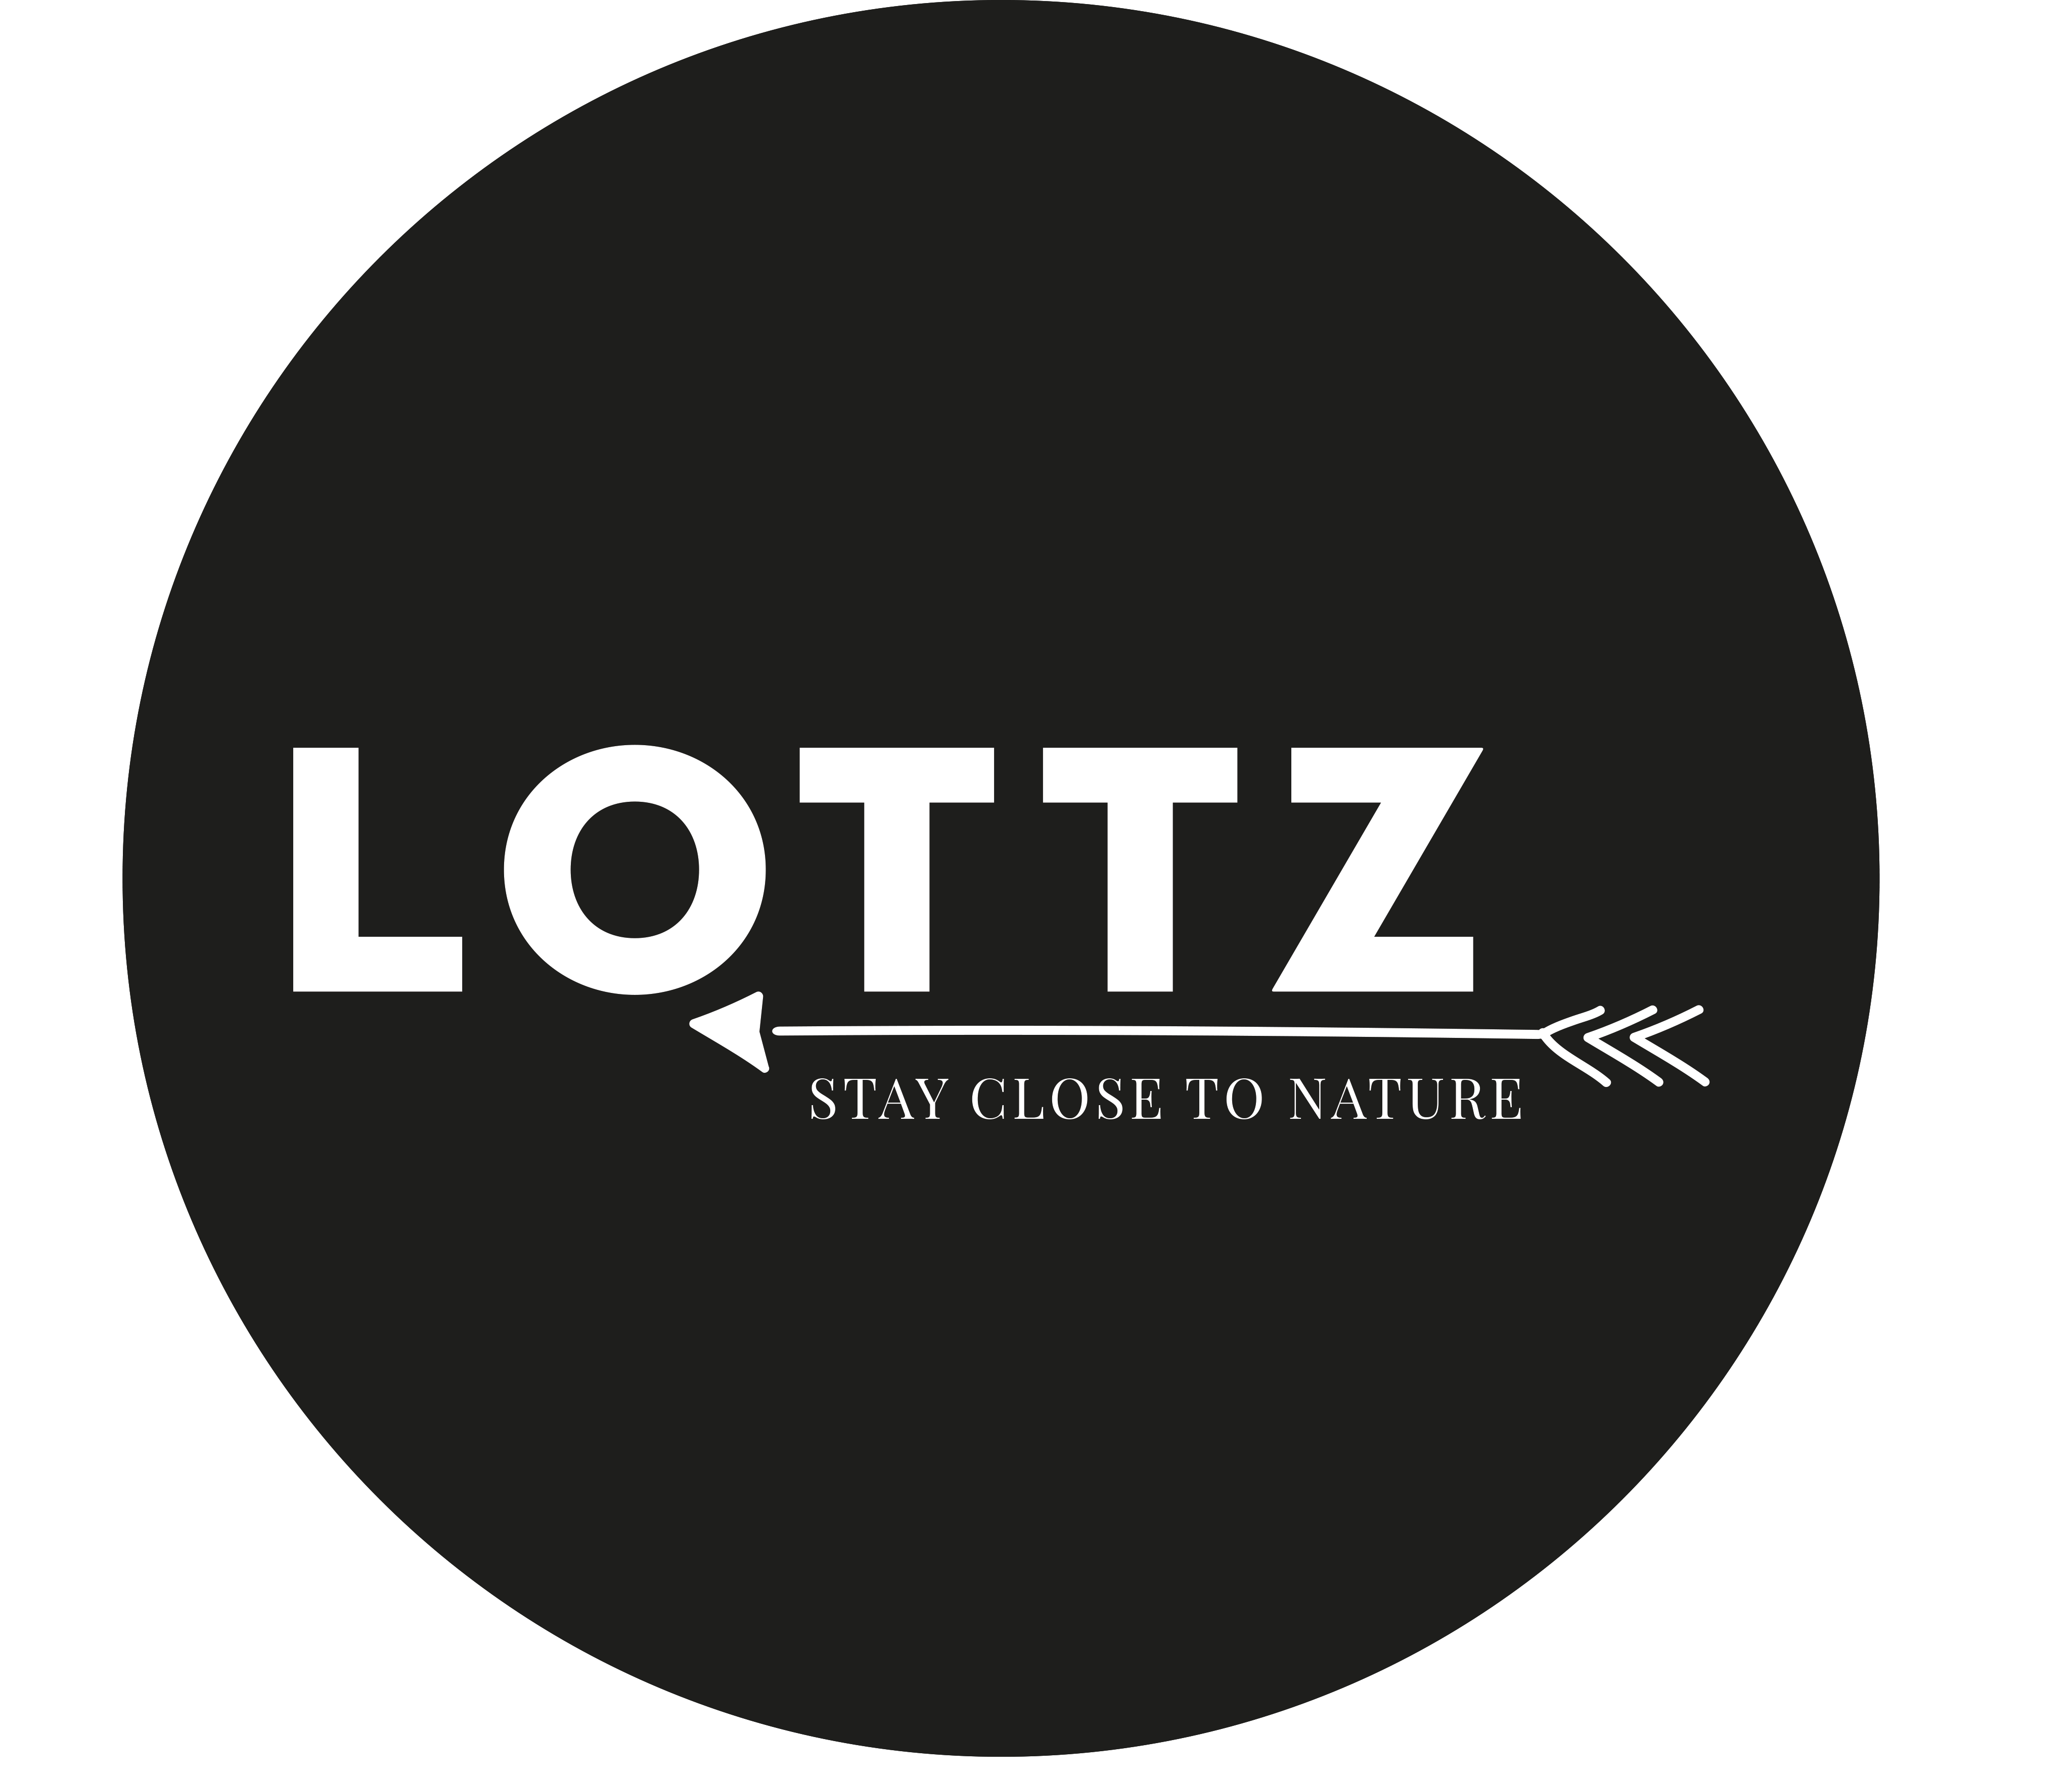 Lottz - Stay close to nature